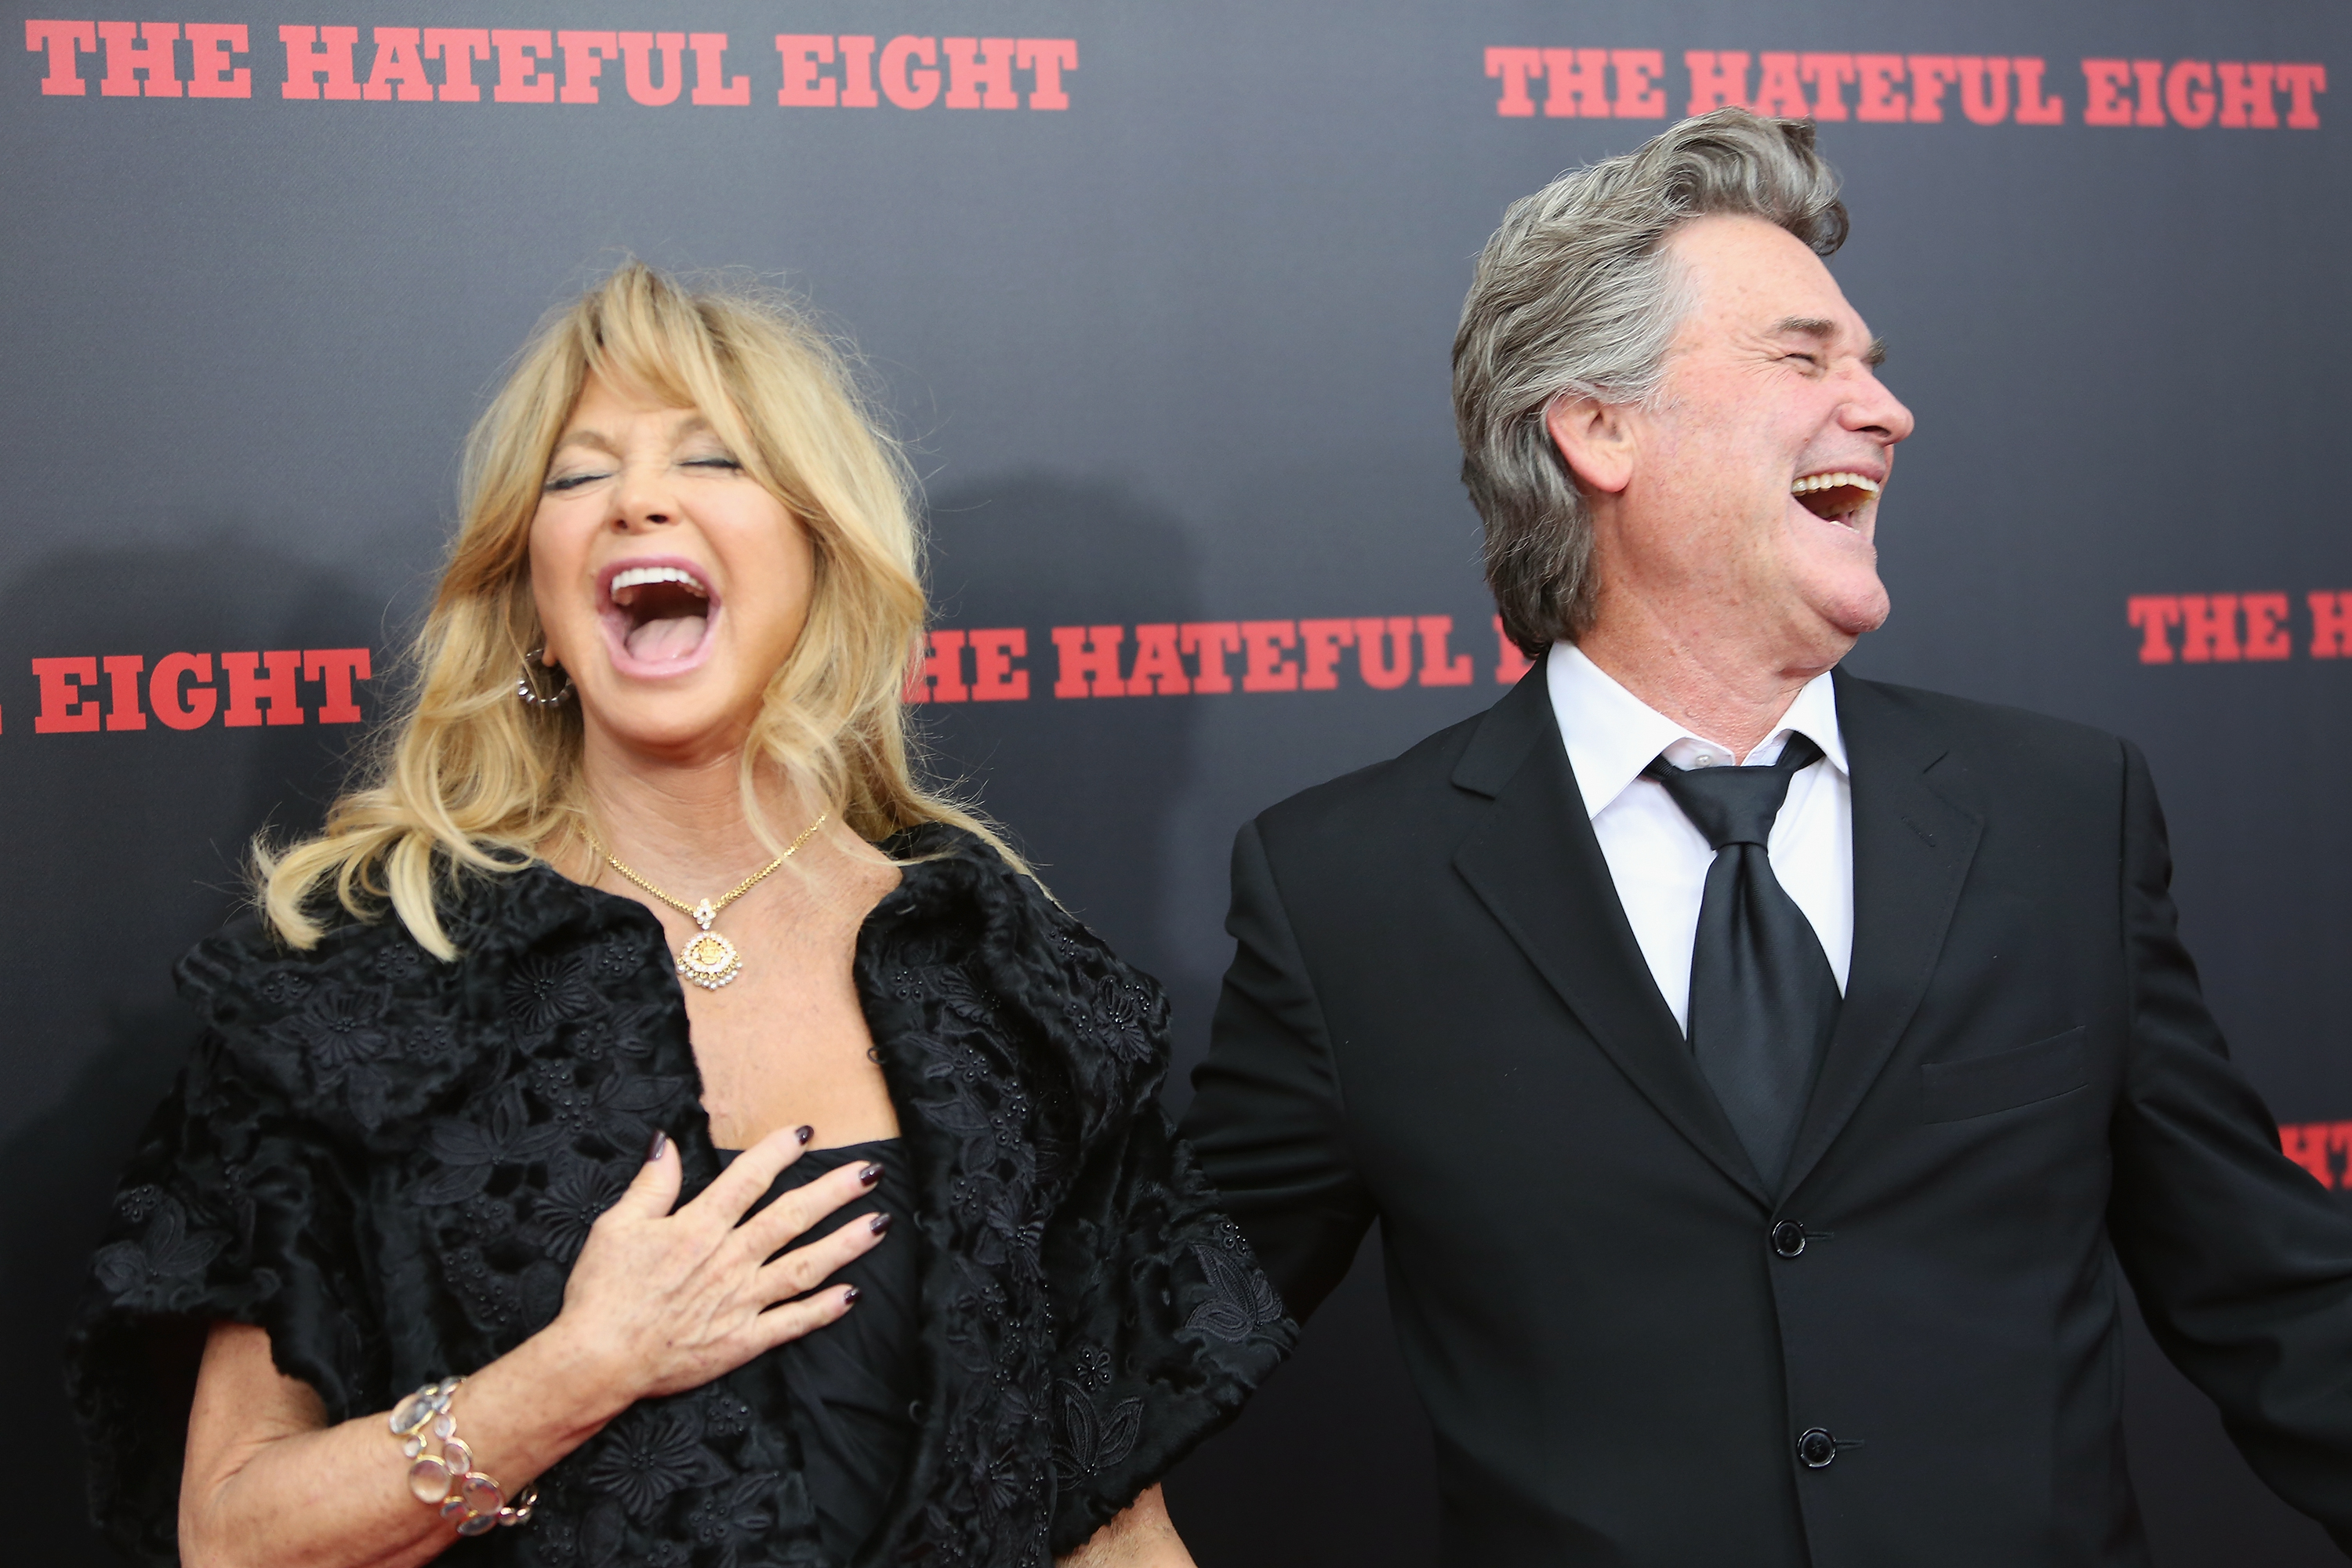 Goldie Hawn and Kurt Russell laugh together as they attend the premiere of "The Hateful Eight" in New York City on December 14, 2015. | Source: Getty Images